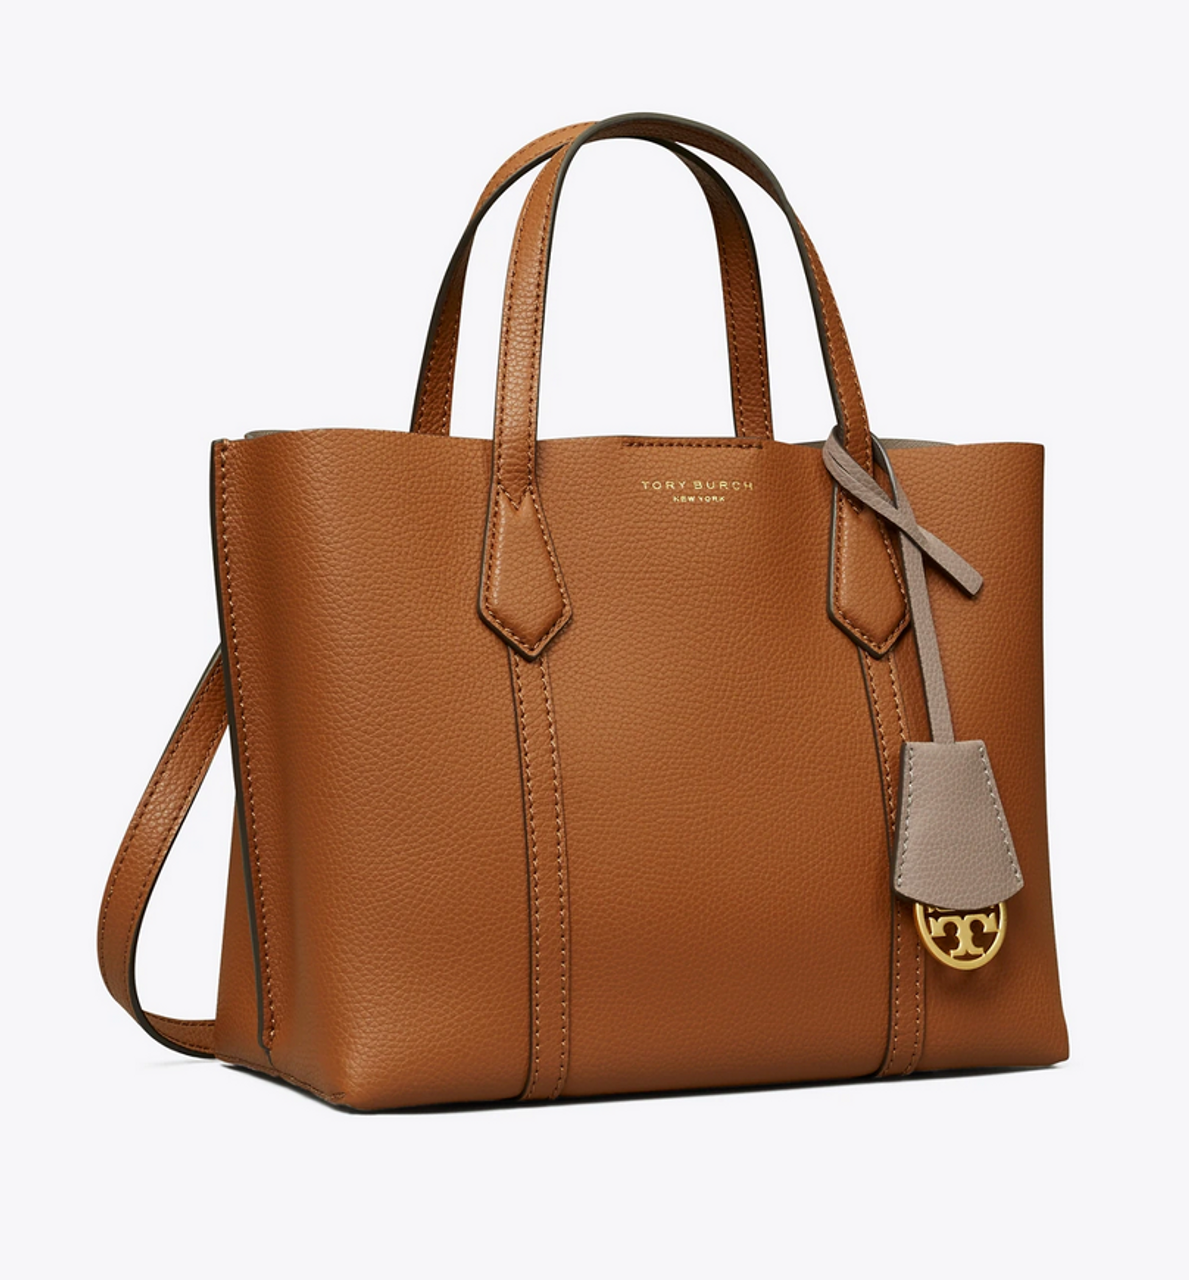 New* Tory Burch PERRY SMALL TRIPLE-COMPARTMENT TOTE BAG